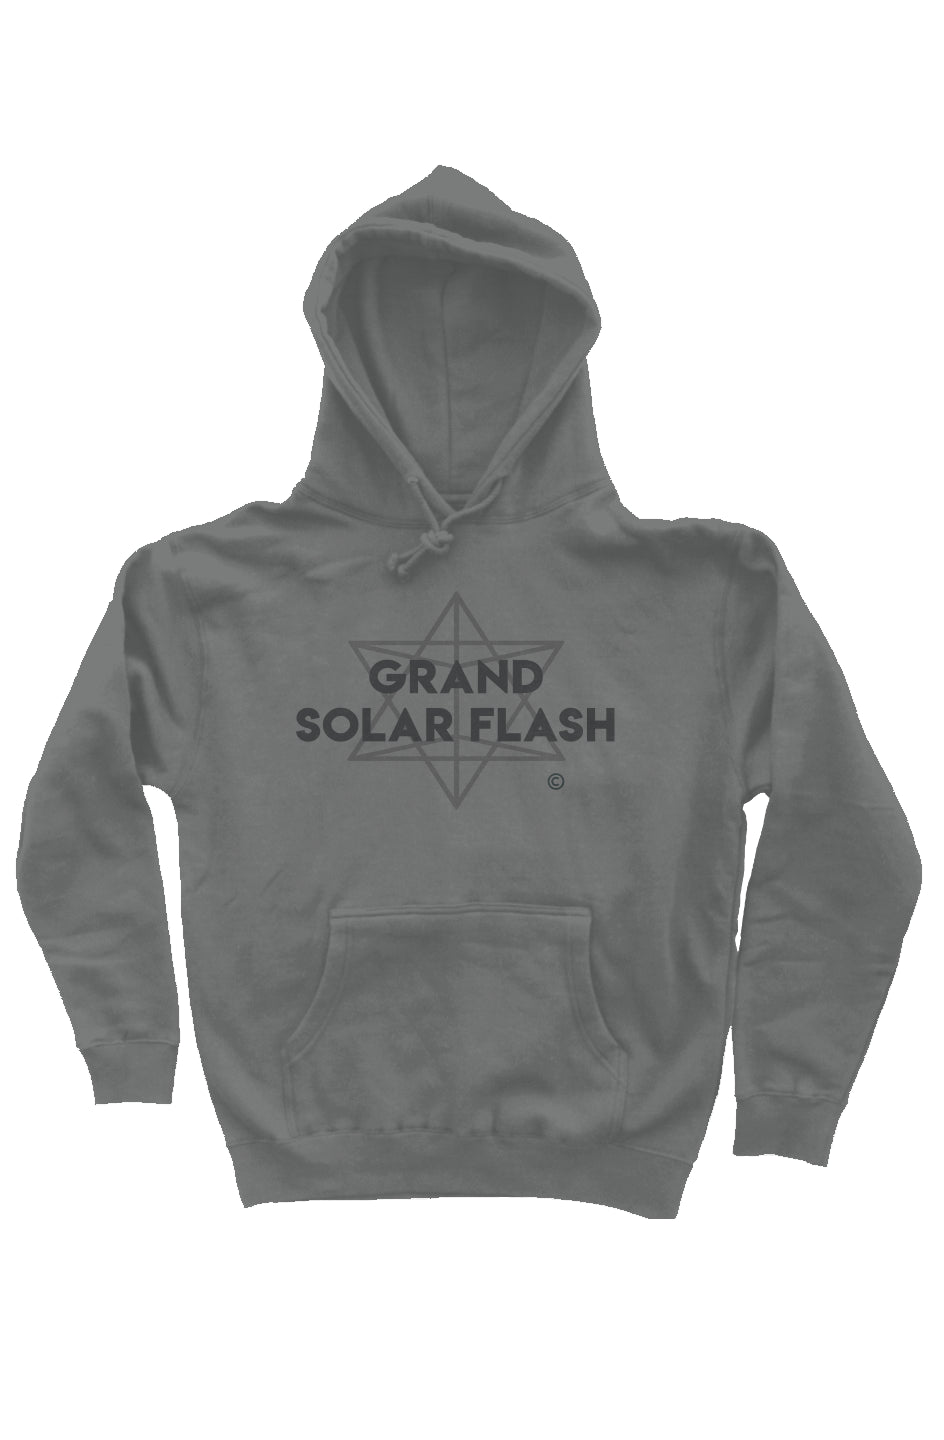 the grand solar flash collection: monochromatic unisex pullover hoody